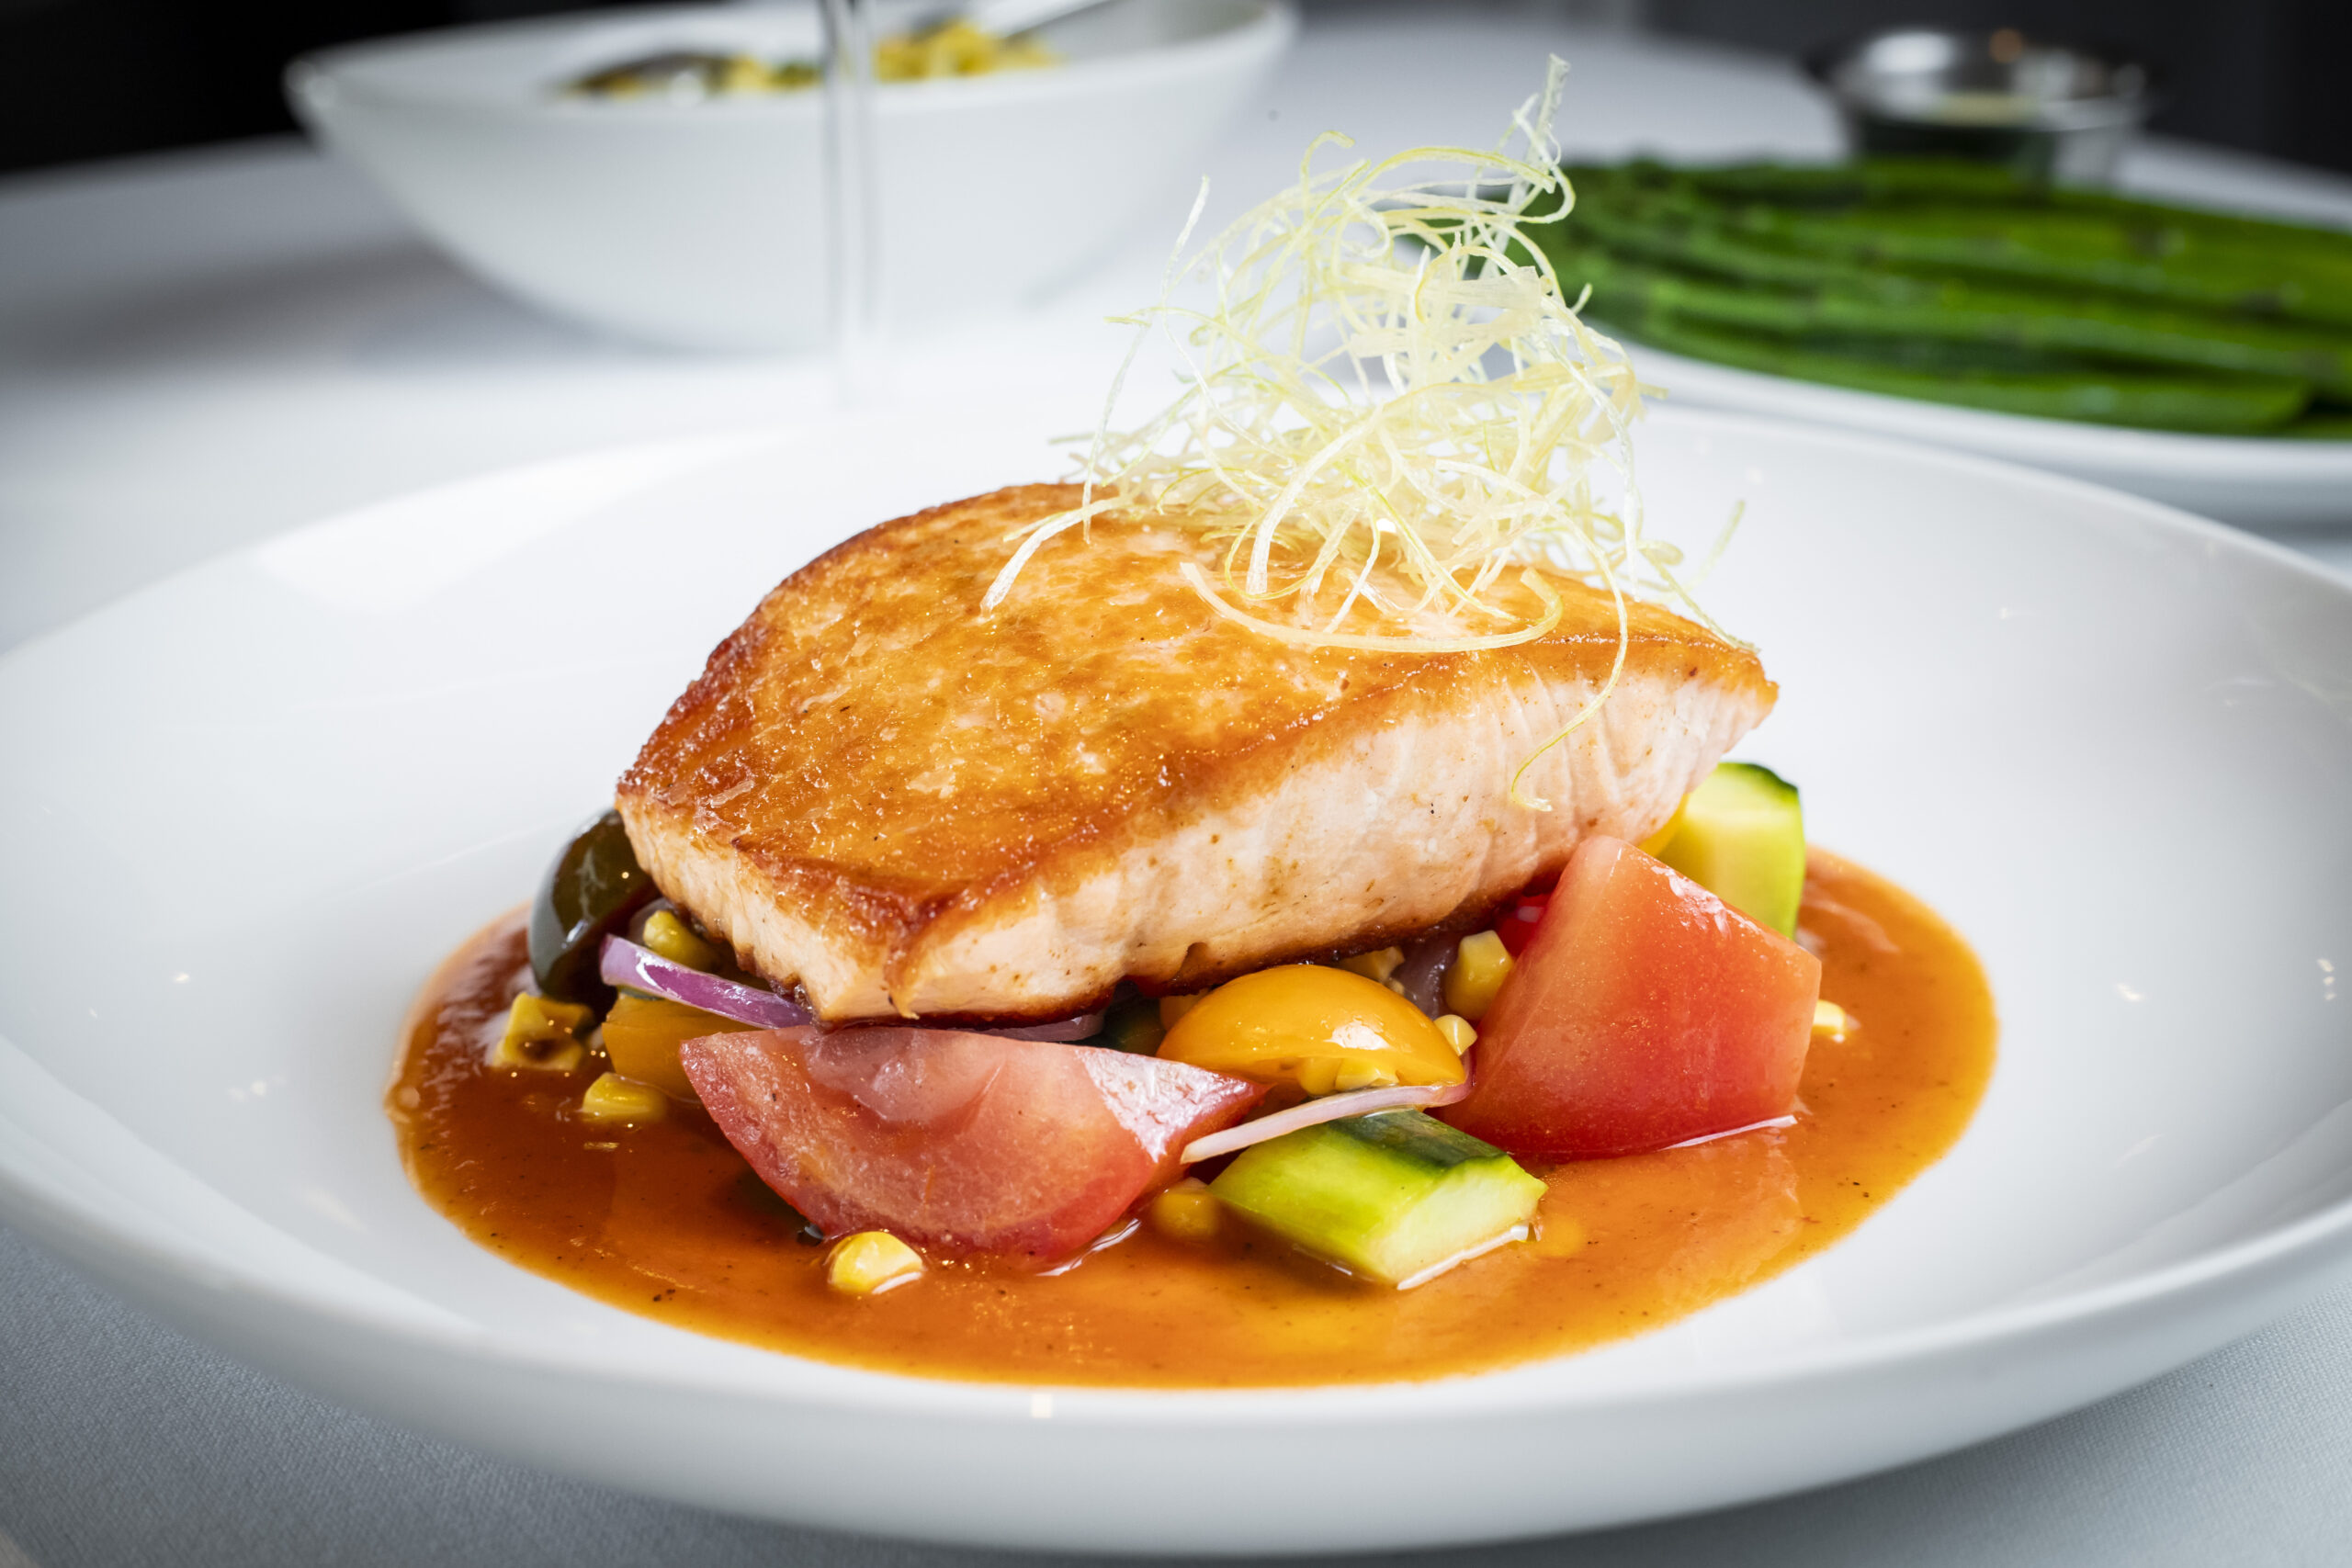 Columbia River Salmon on a dish at Ocean Prime restaurants